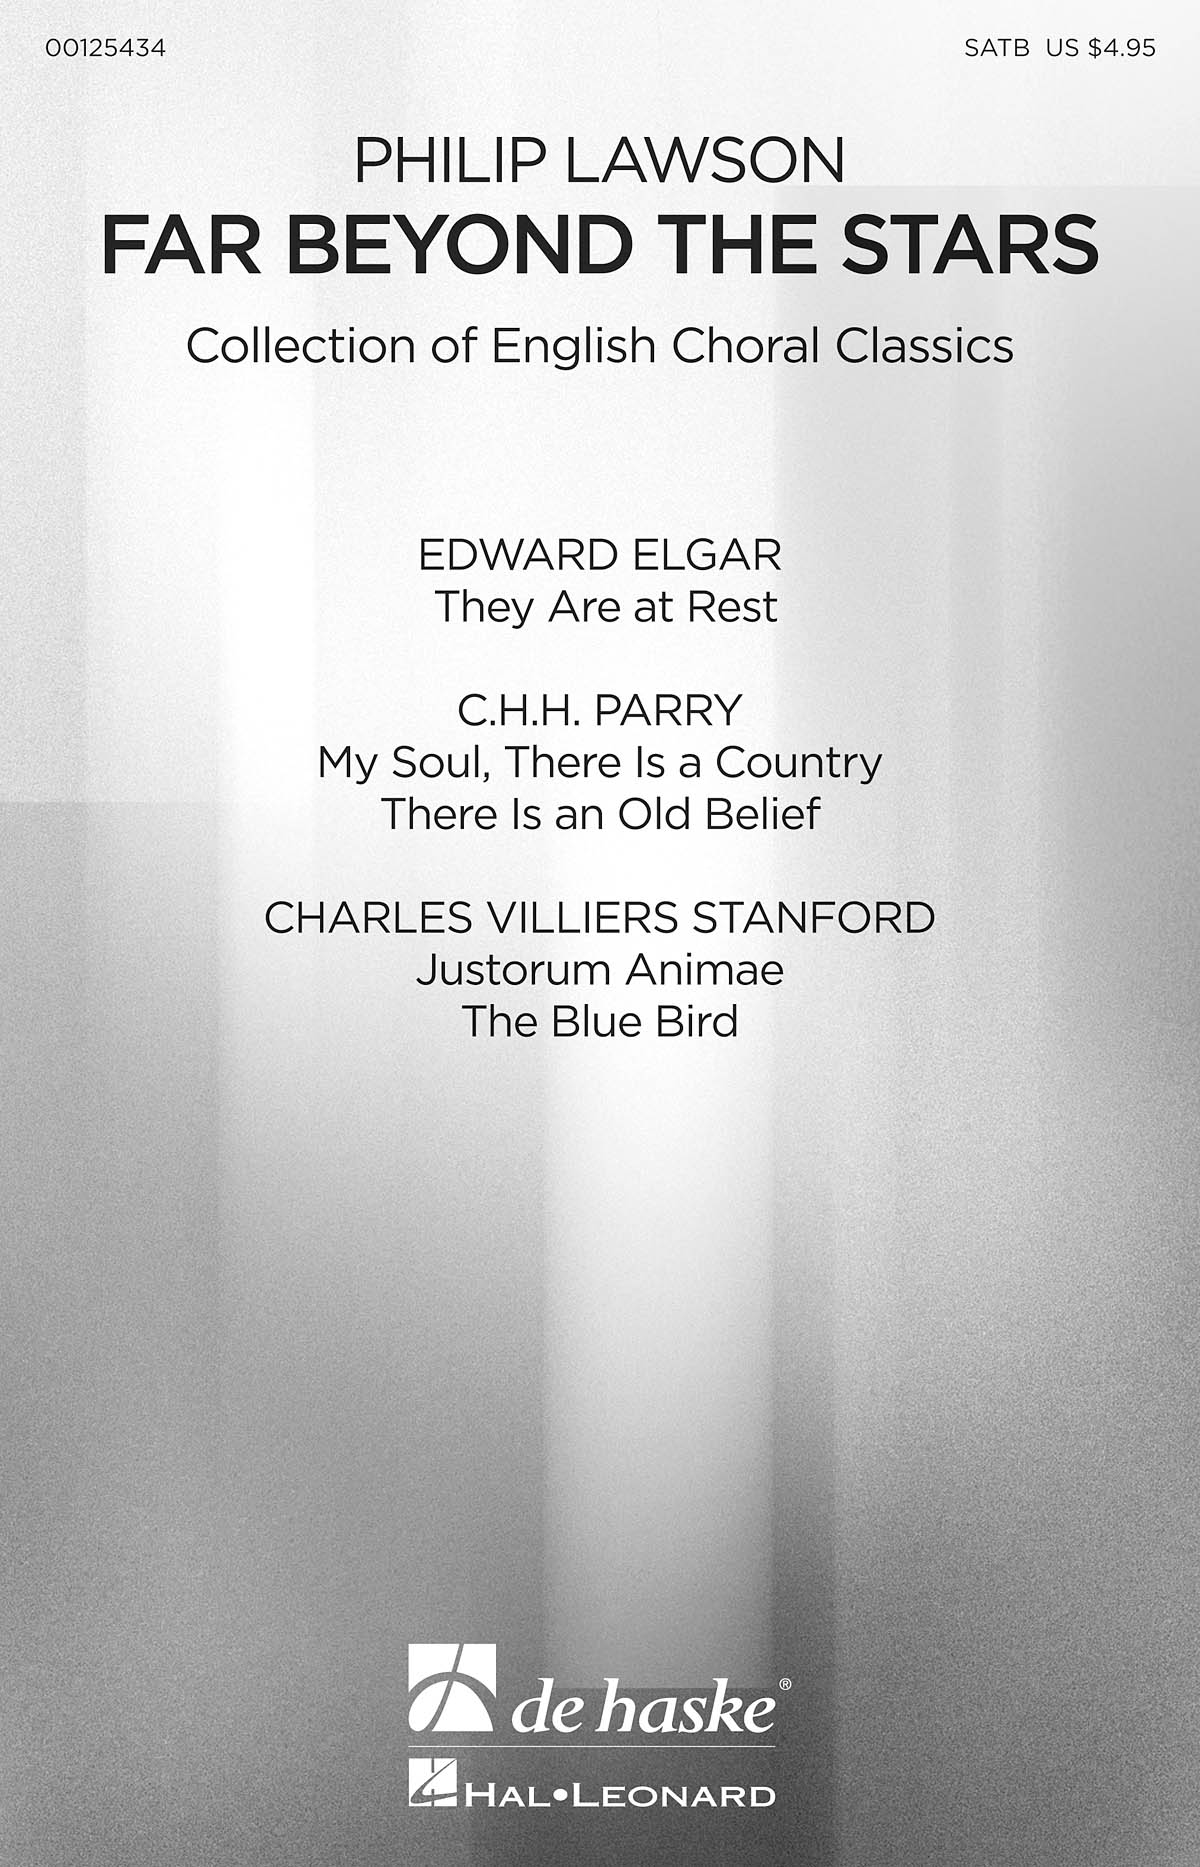 Far Beyond the Stars - Collection of English Choral Classics noty pro sbor SATB